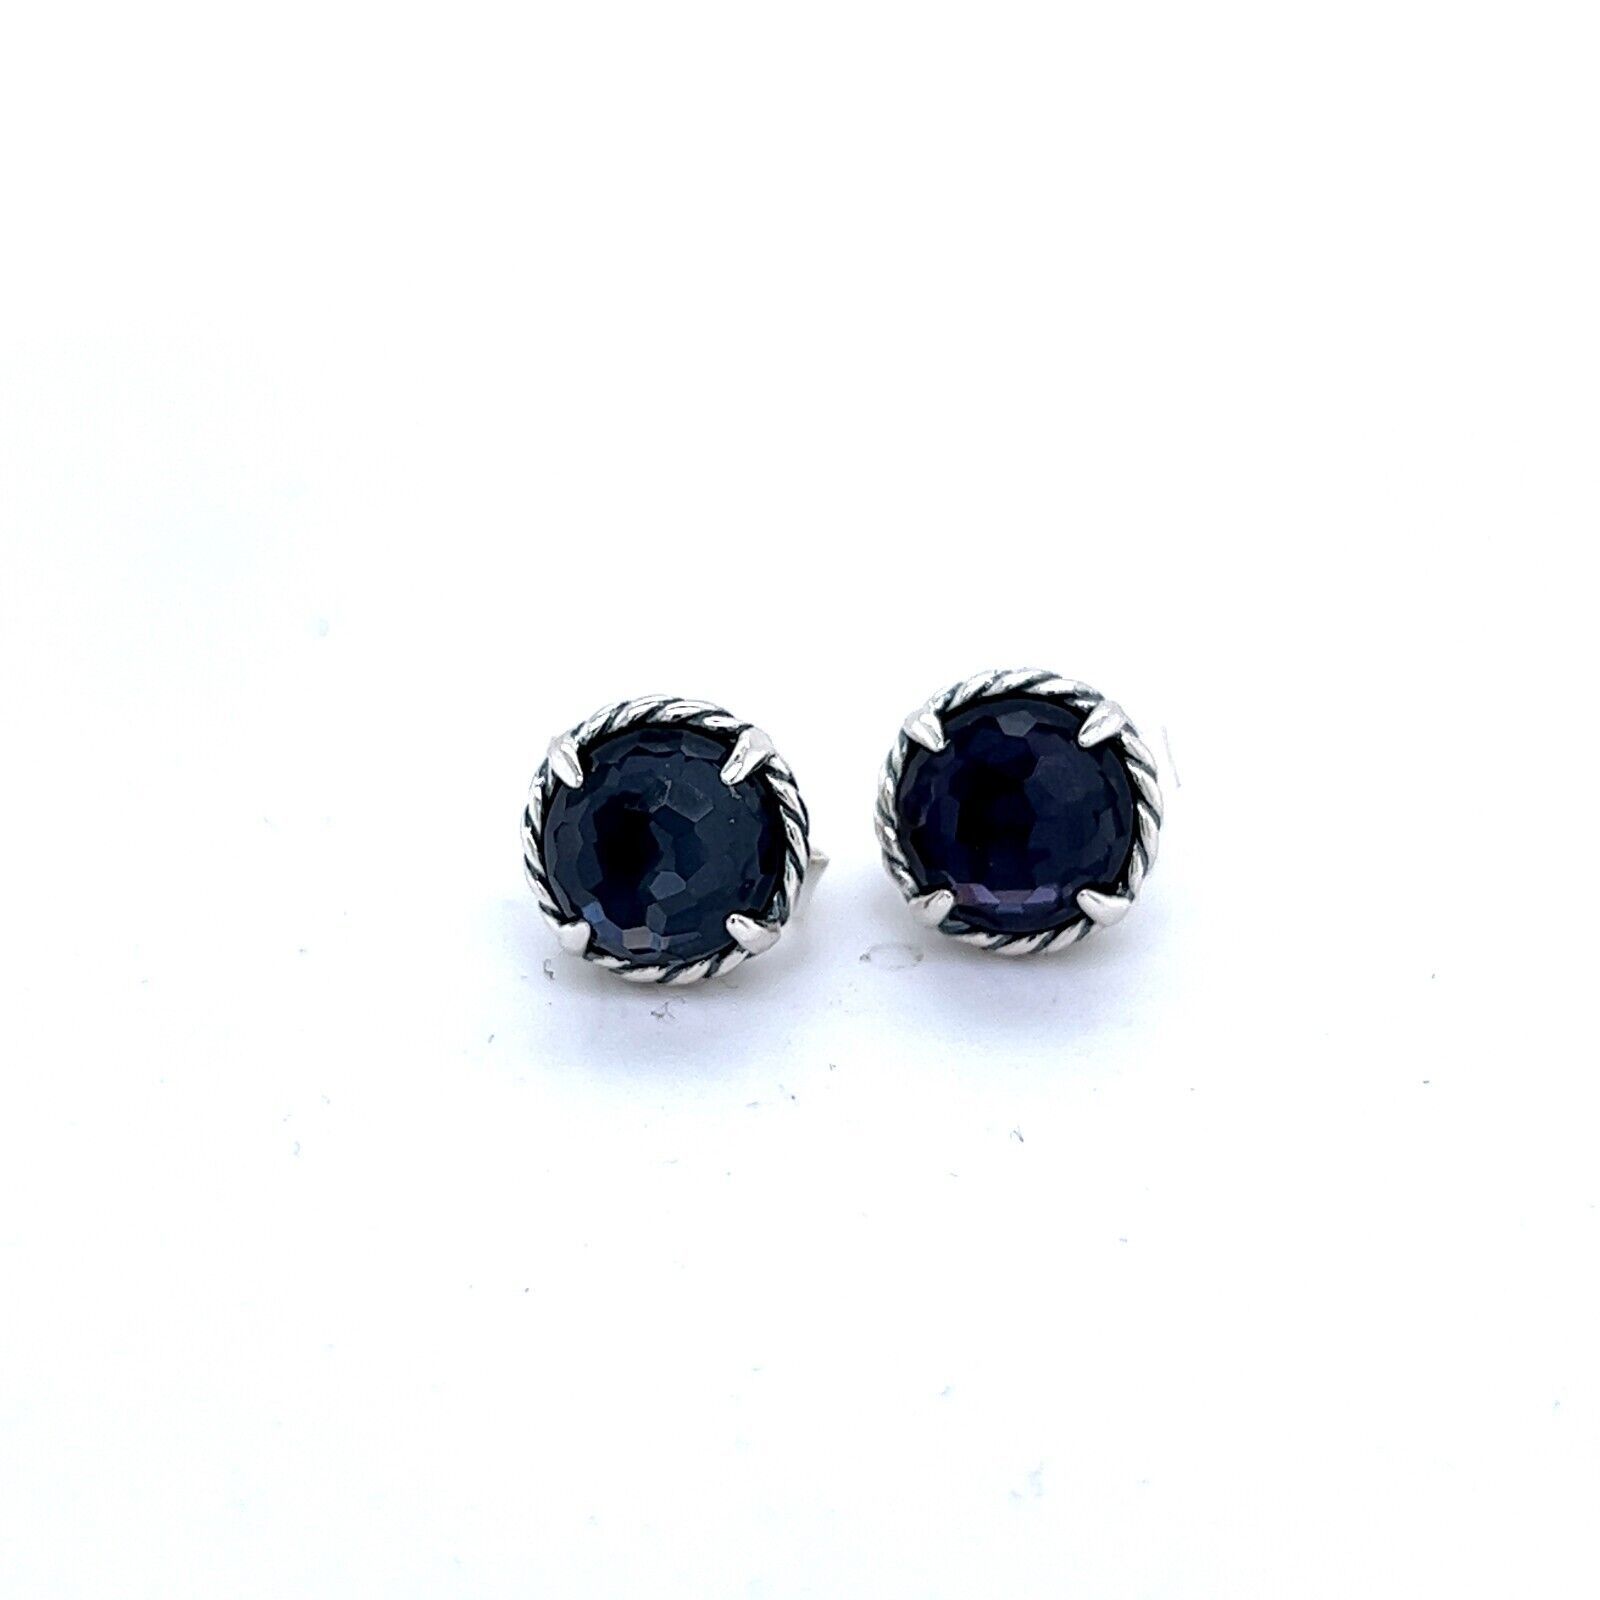 Primary image for David Yurman Estate Black Orchid Petite Chantelaine Stud Earrings Silver DY160